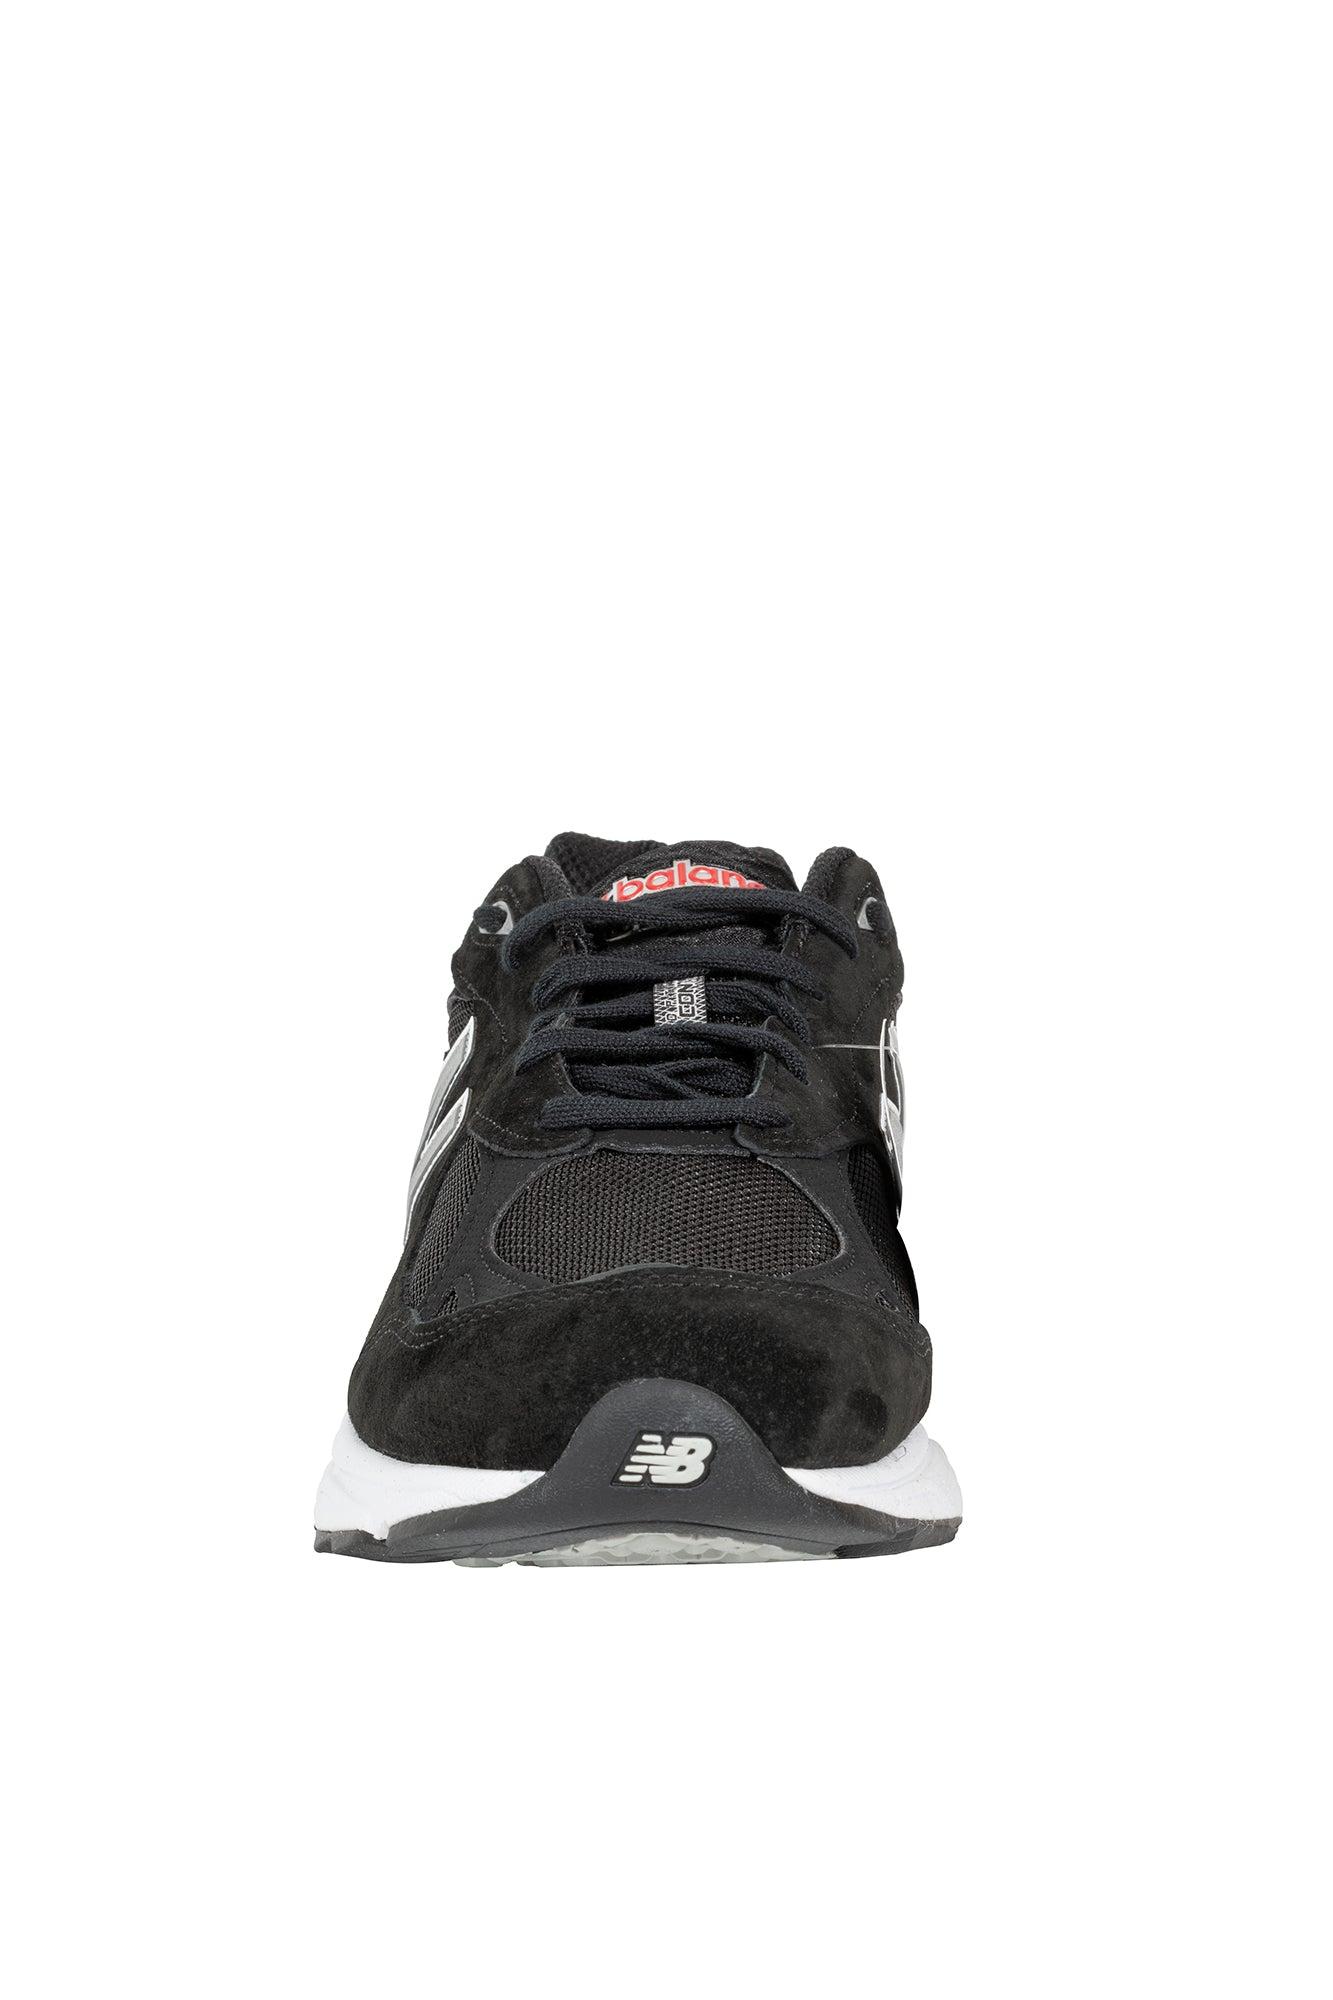 New Balance Made In Usa 990v3 Black Trainers for Men | Lyst